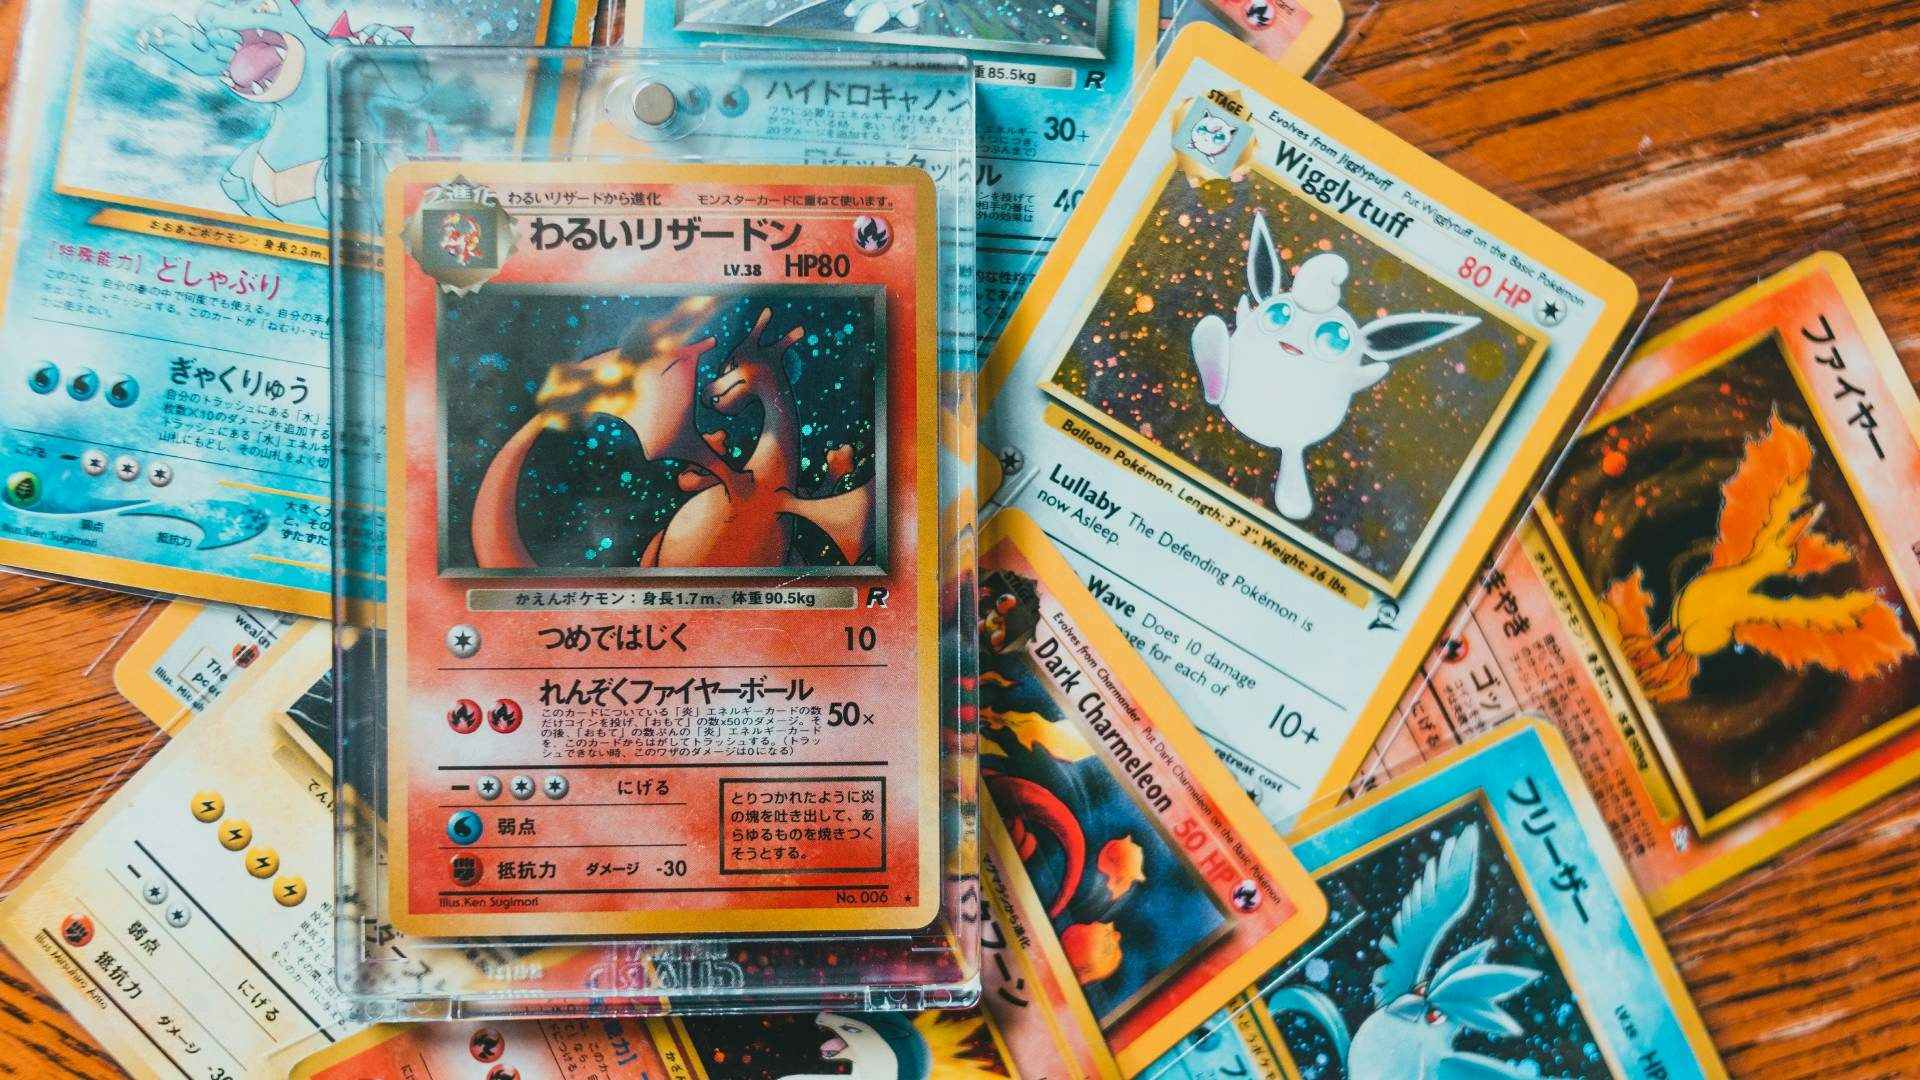 Share a picture of the best Pokémon card you own!